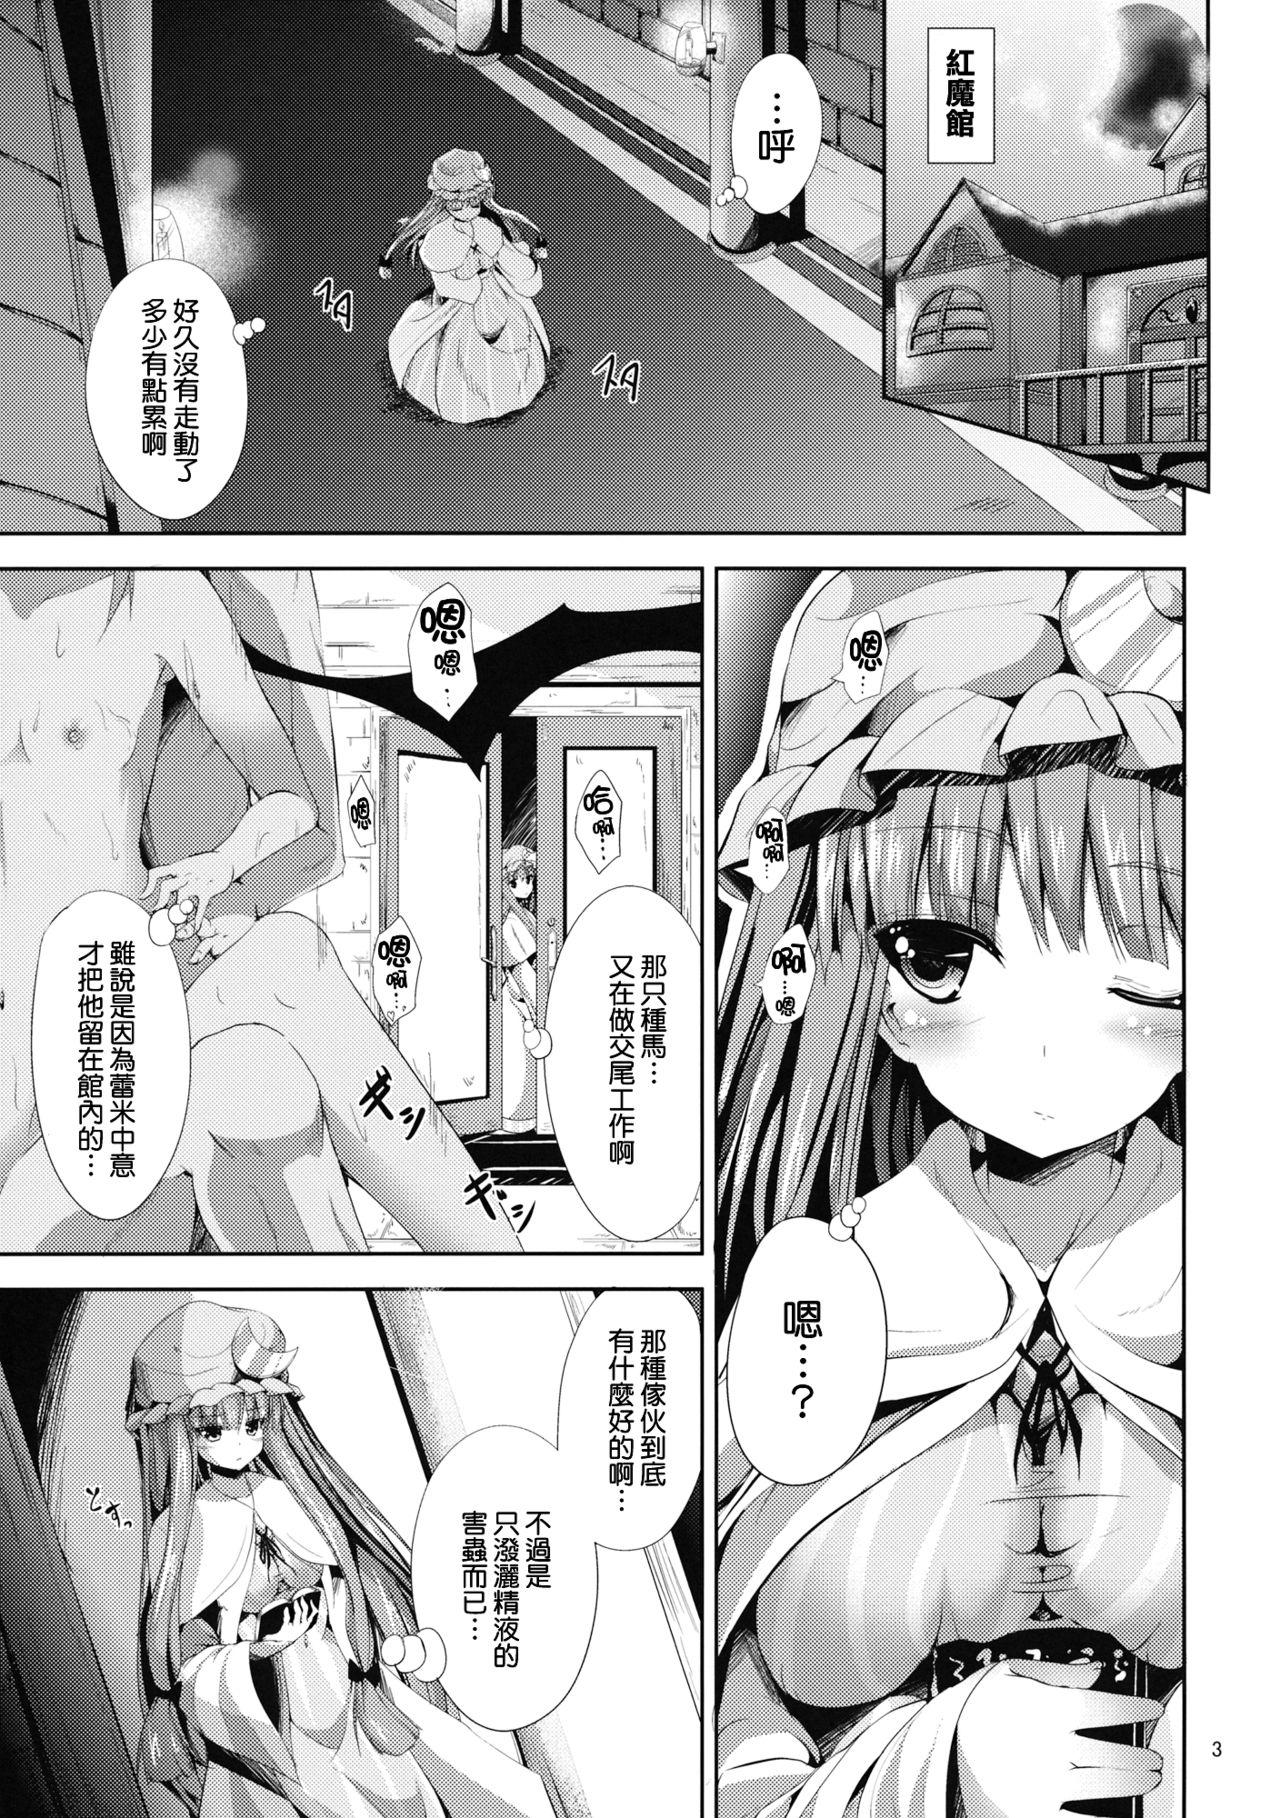 Aunty Sweet nothingS - Touhou project Jerk Off - Page 3